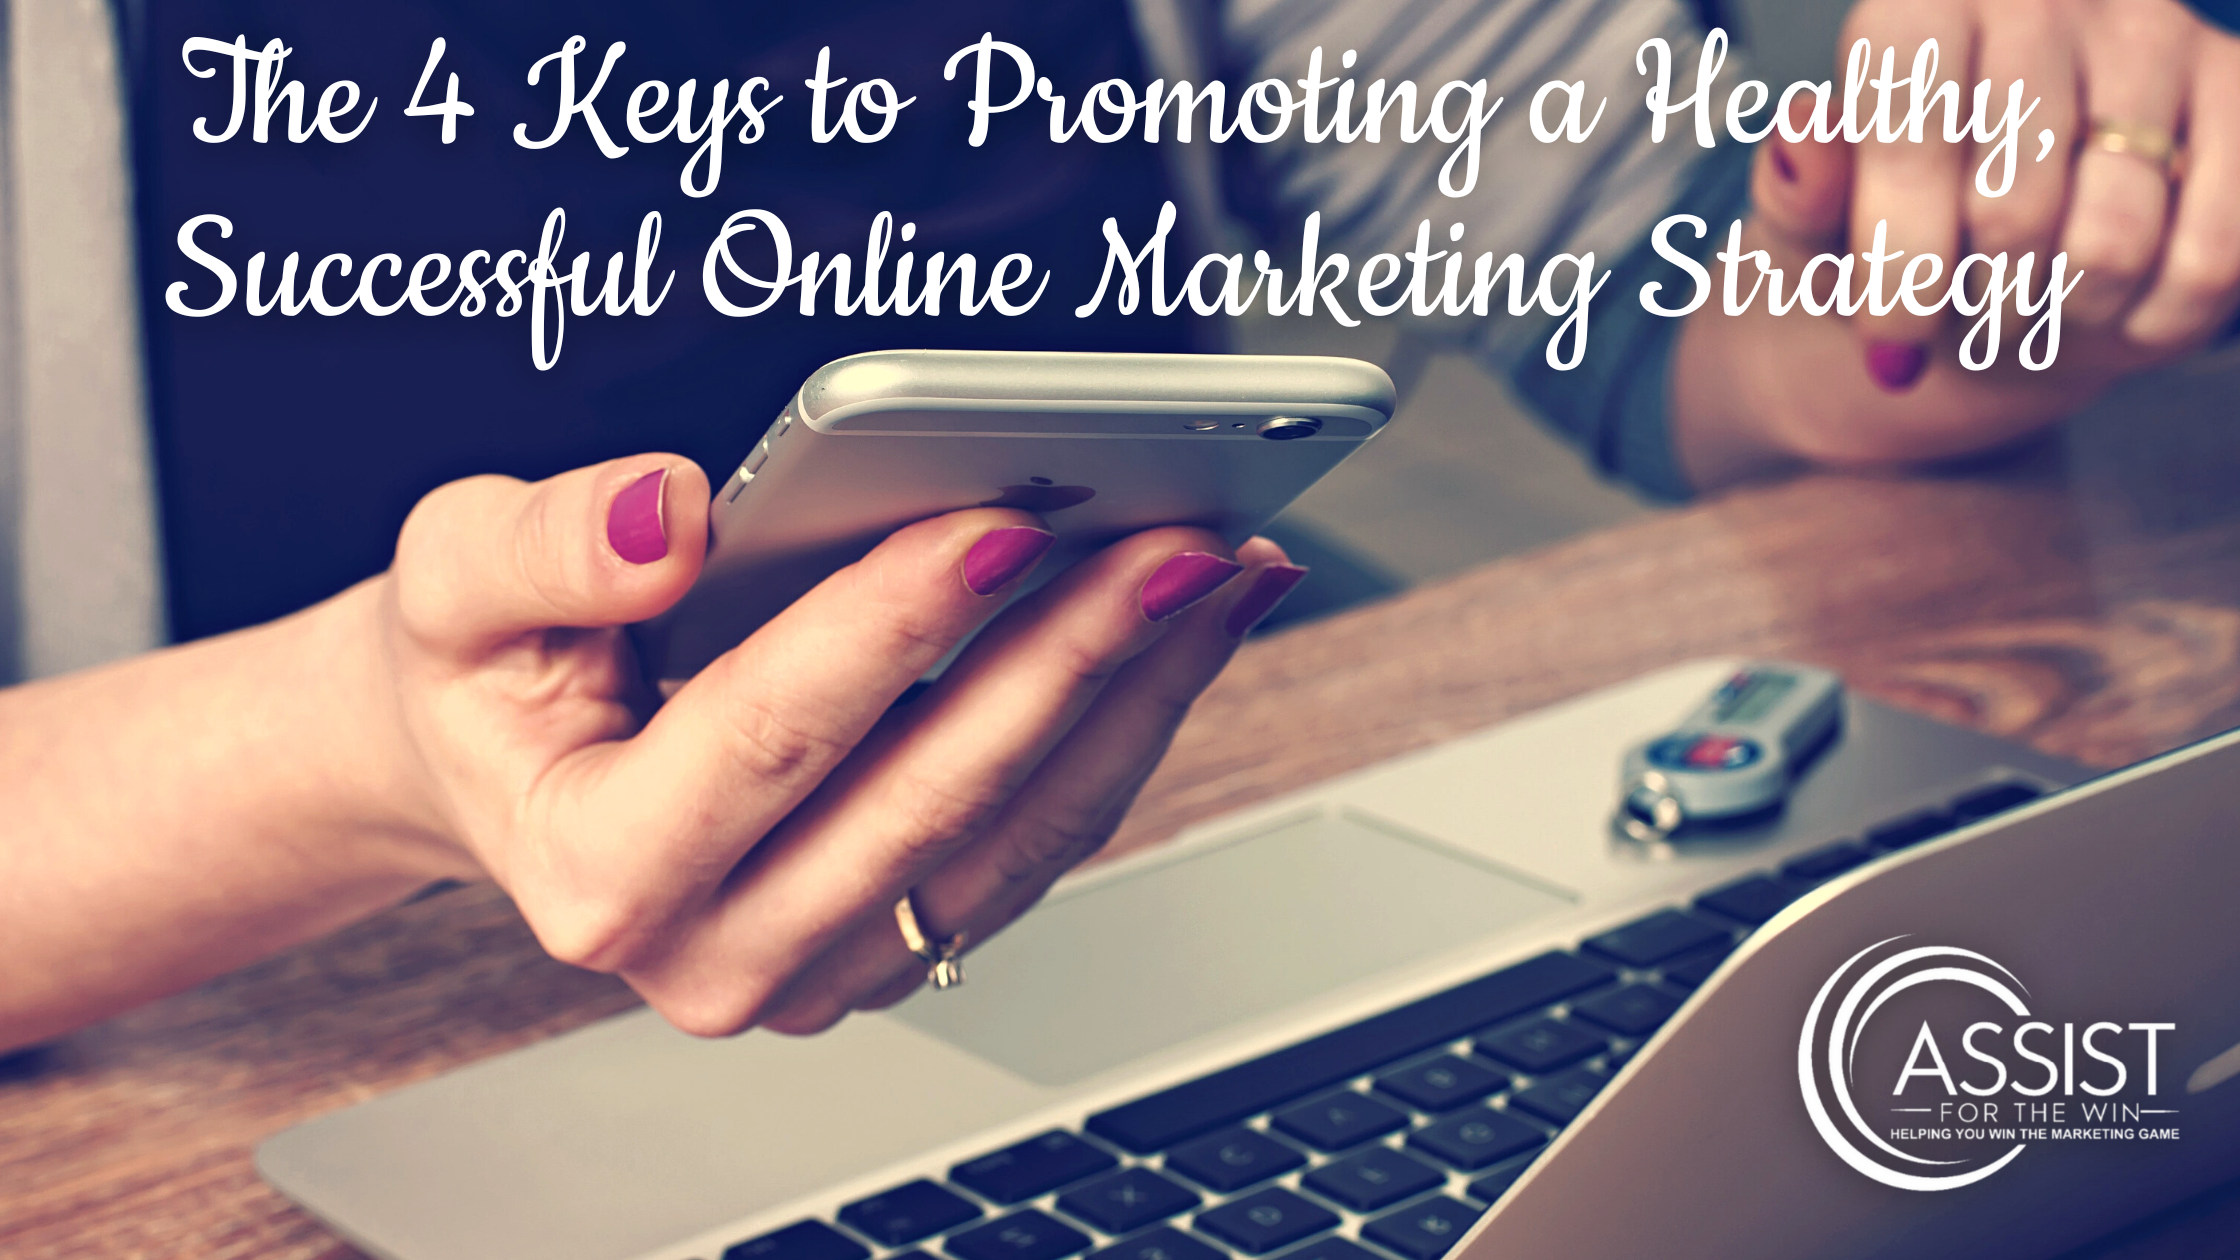 The 4 Keys to Promoting a Healthy, Successful Online Marketing Strategy